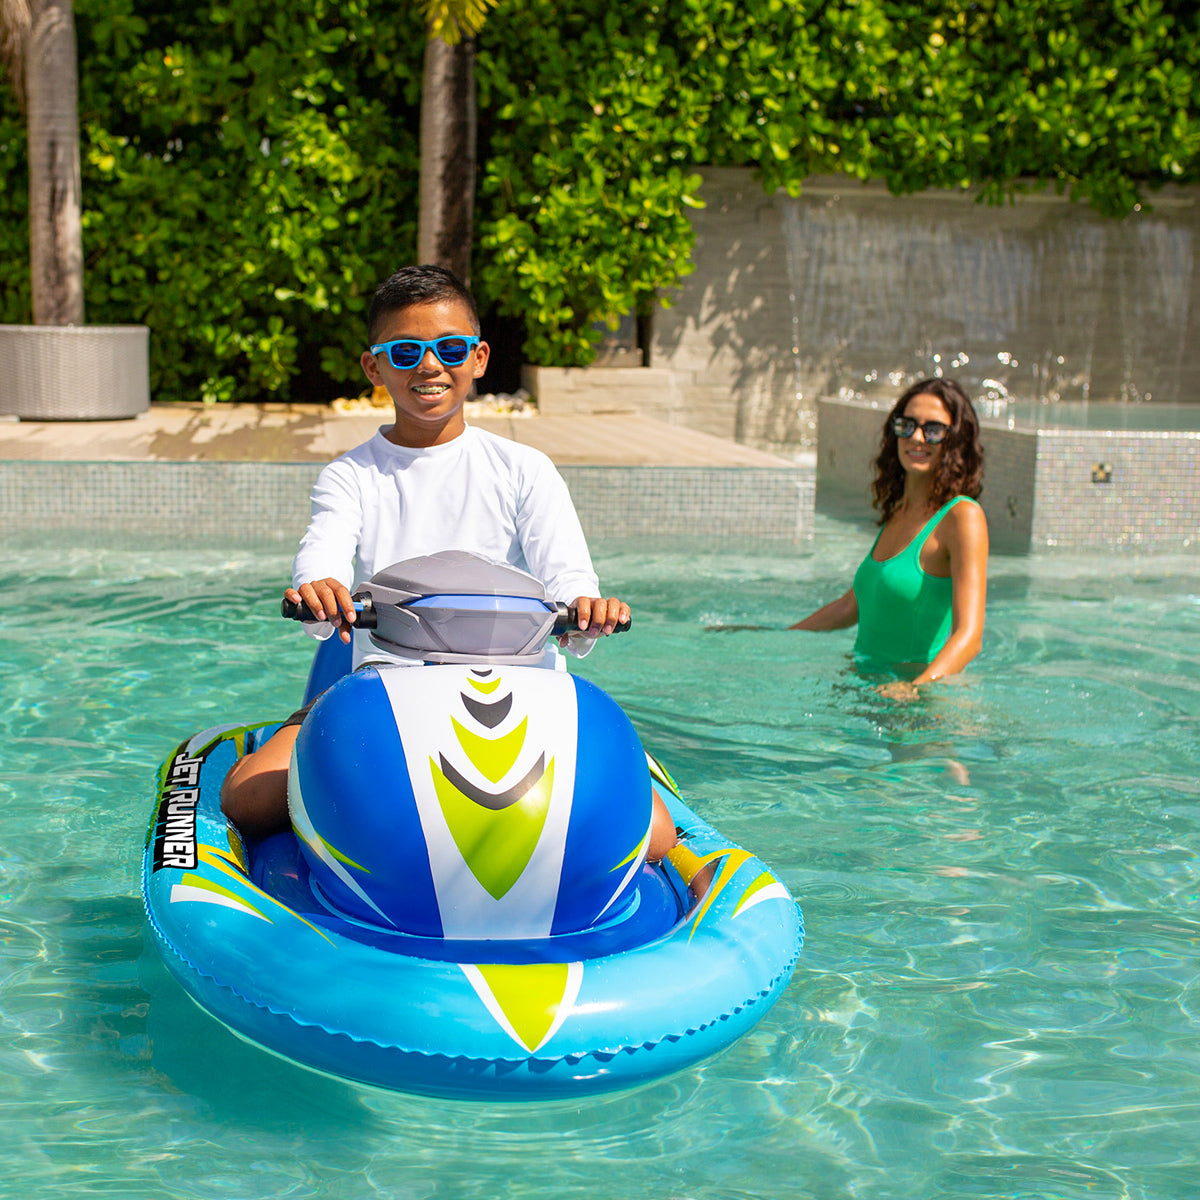 Jet Runner Motorized Inflatable Kids Water Craft By PoolCandy | lupon ...